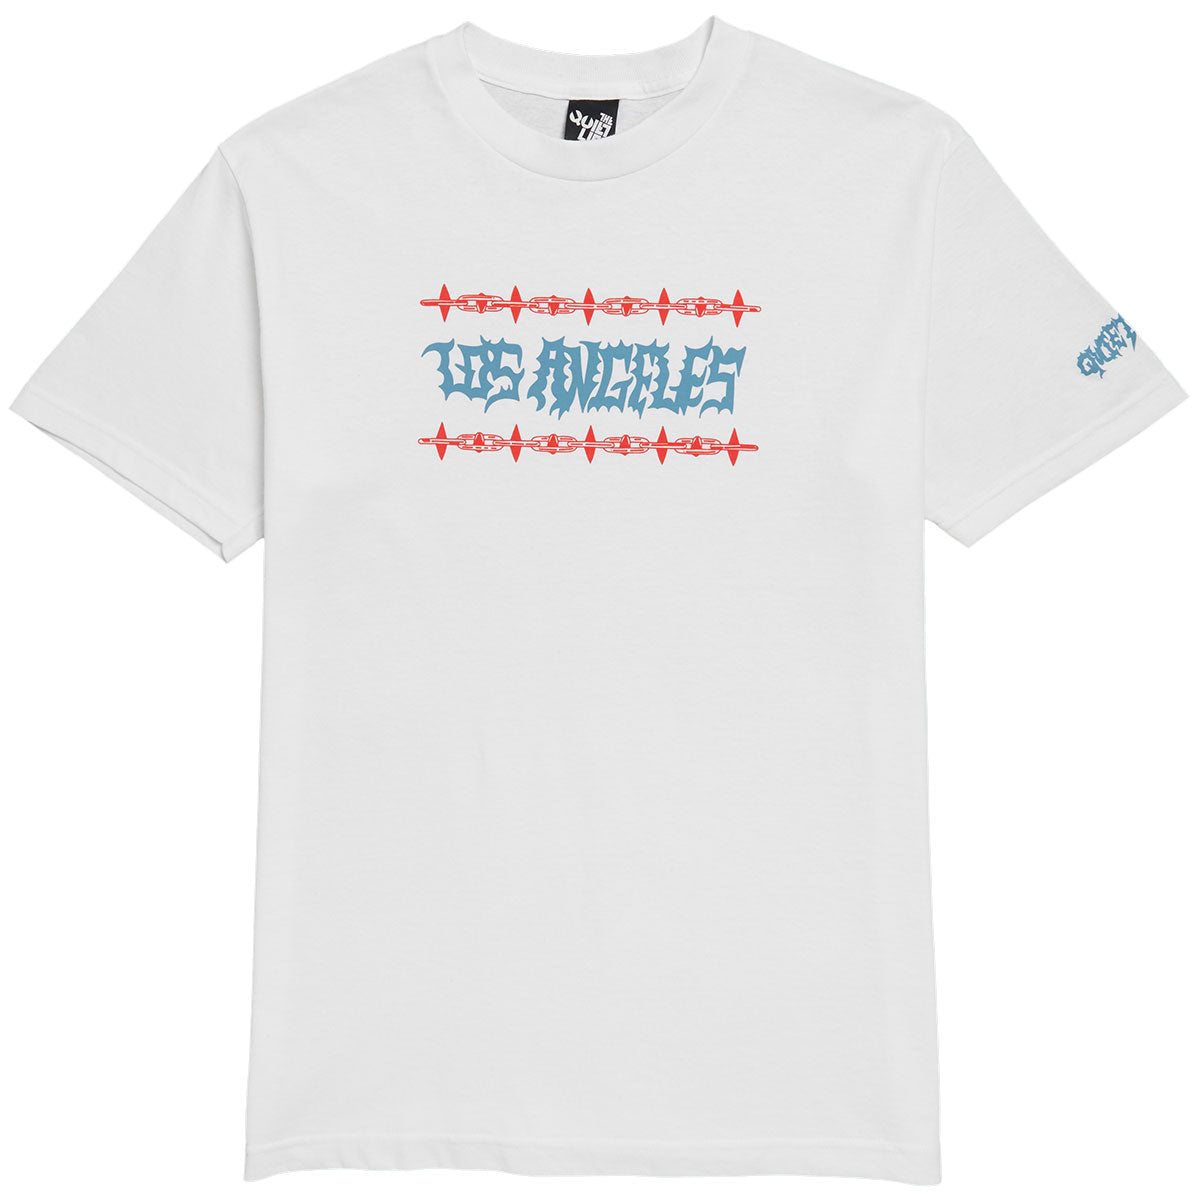 The Quiet Life x Jay Howell LA T-Shirt - White image 1